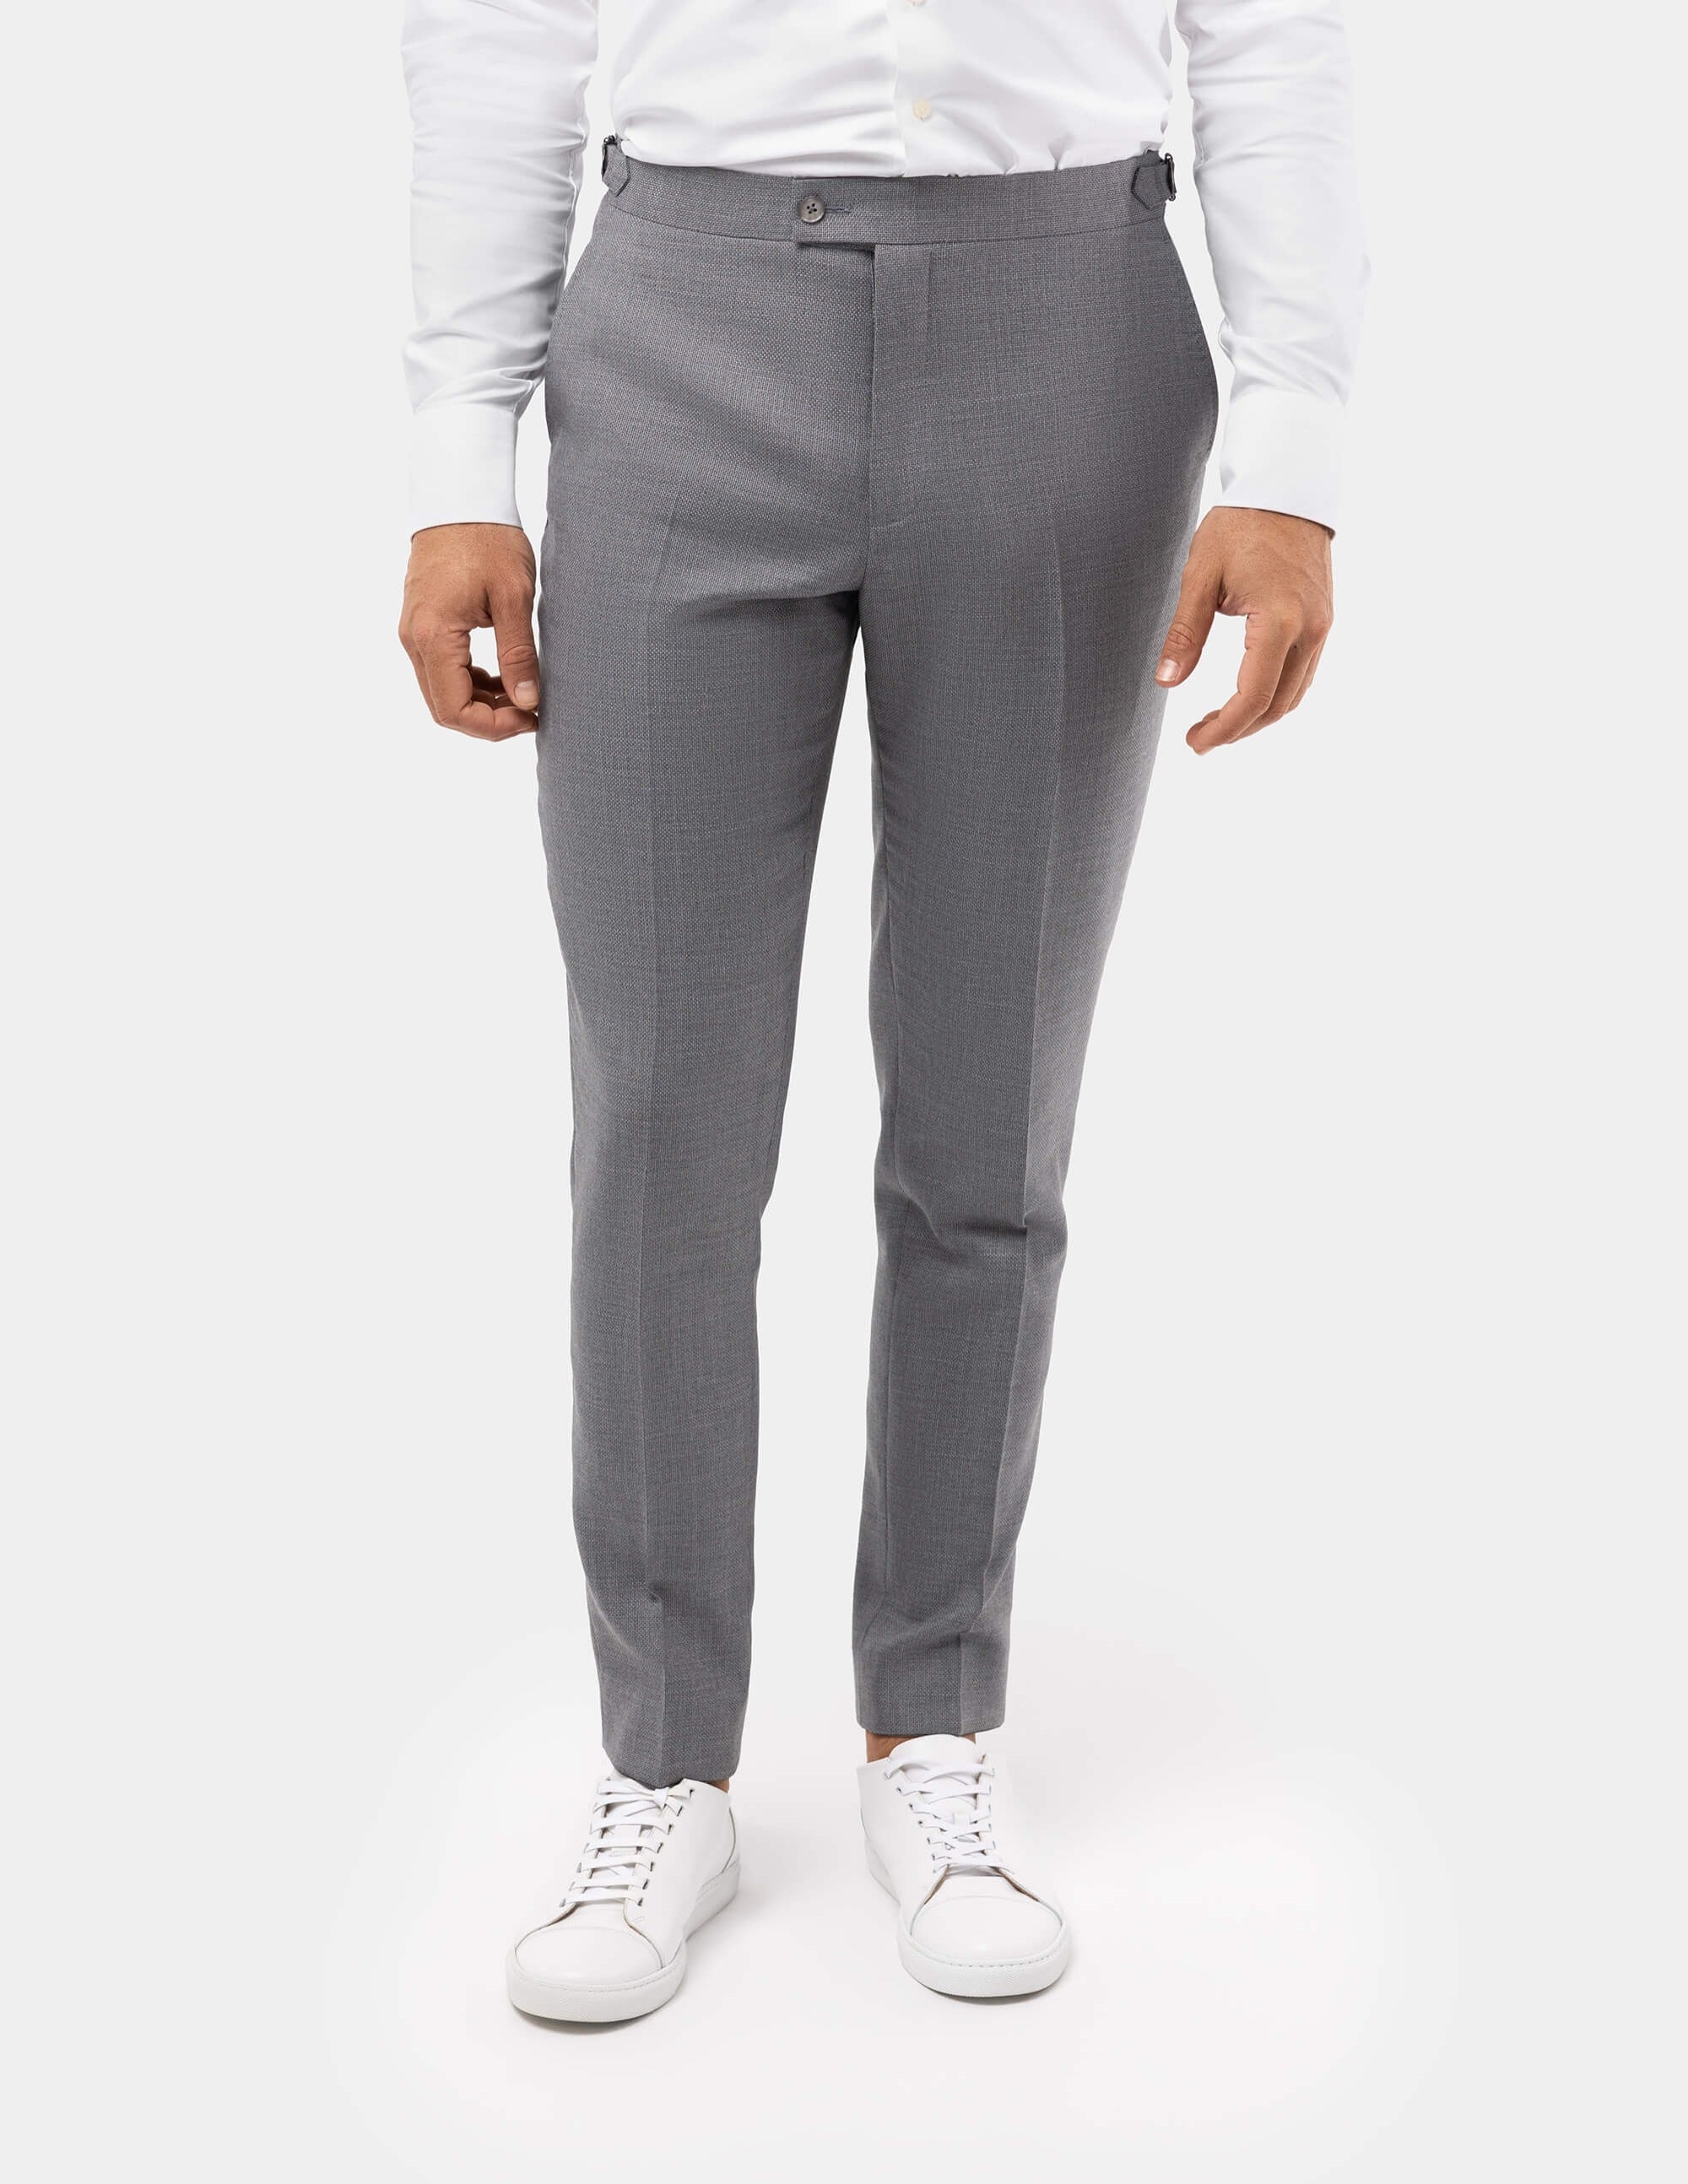 Grey Double Breasted Suit - Samir Bachkami